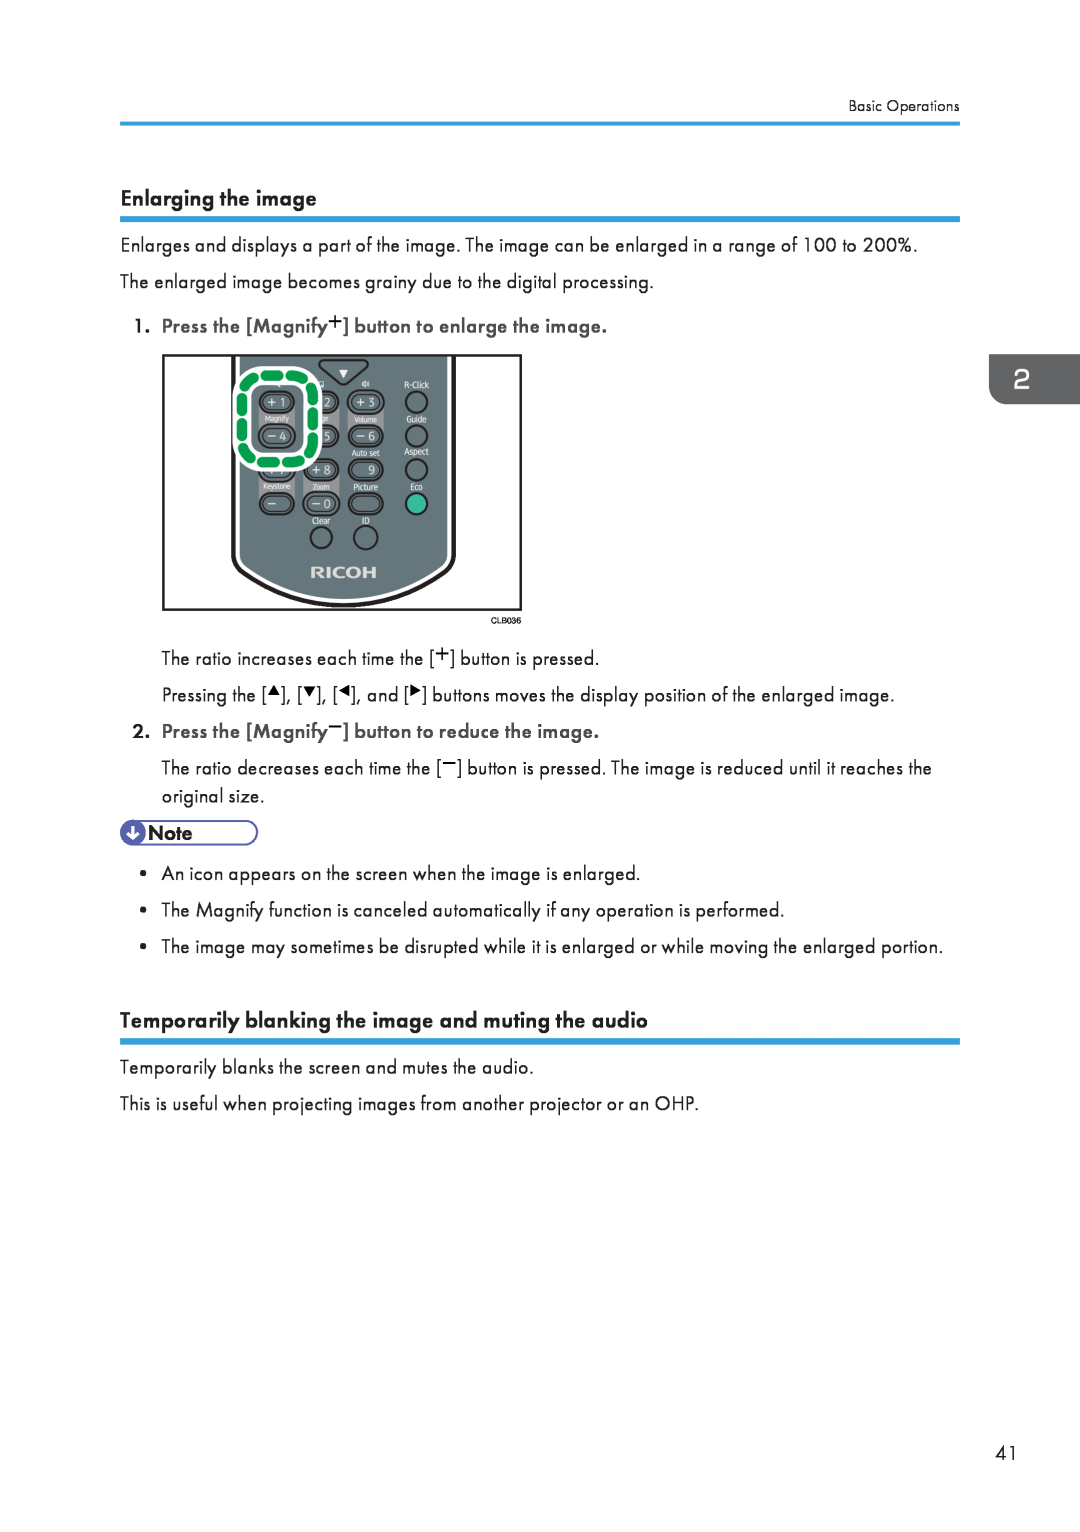 Ricoh WX4130n operating instructions Enlarging the image, Temporarily blanking the image and muting the audio 